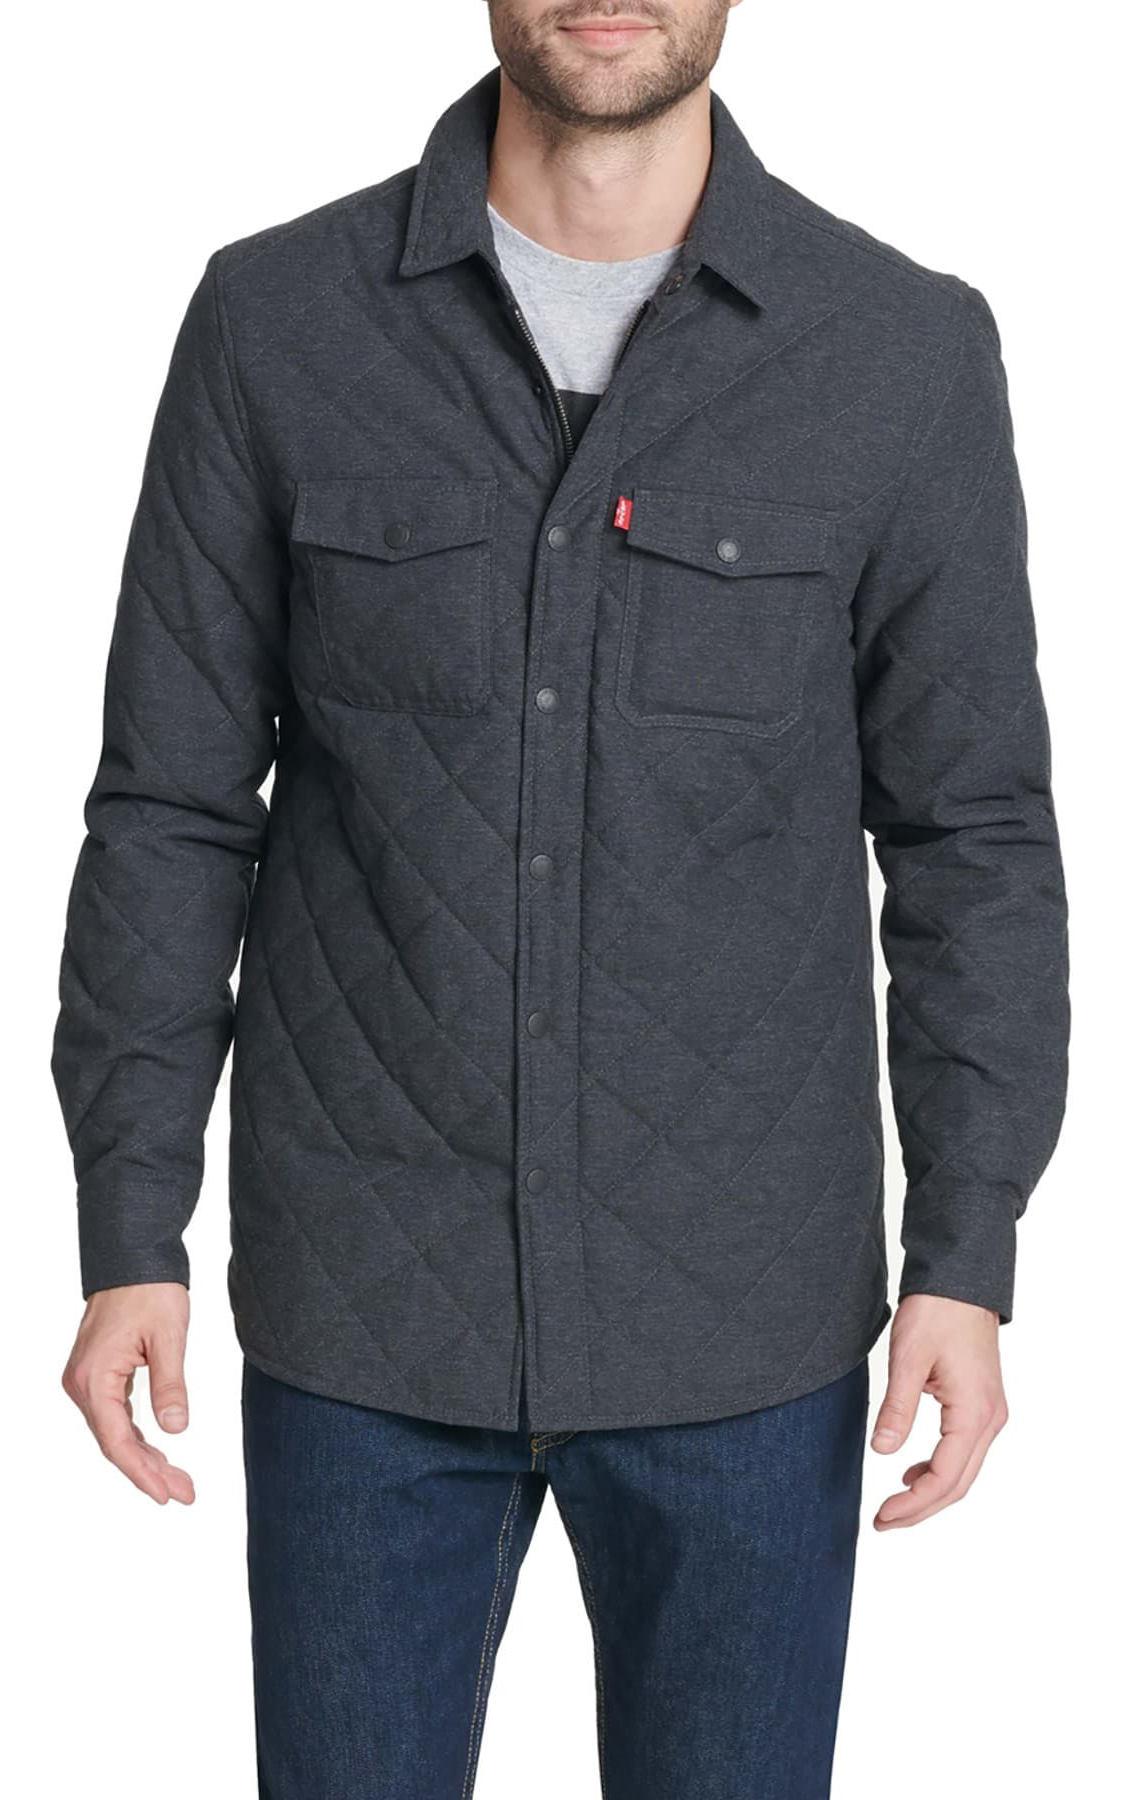  Levi's Diamond Quilted Shacket - Charcoal